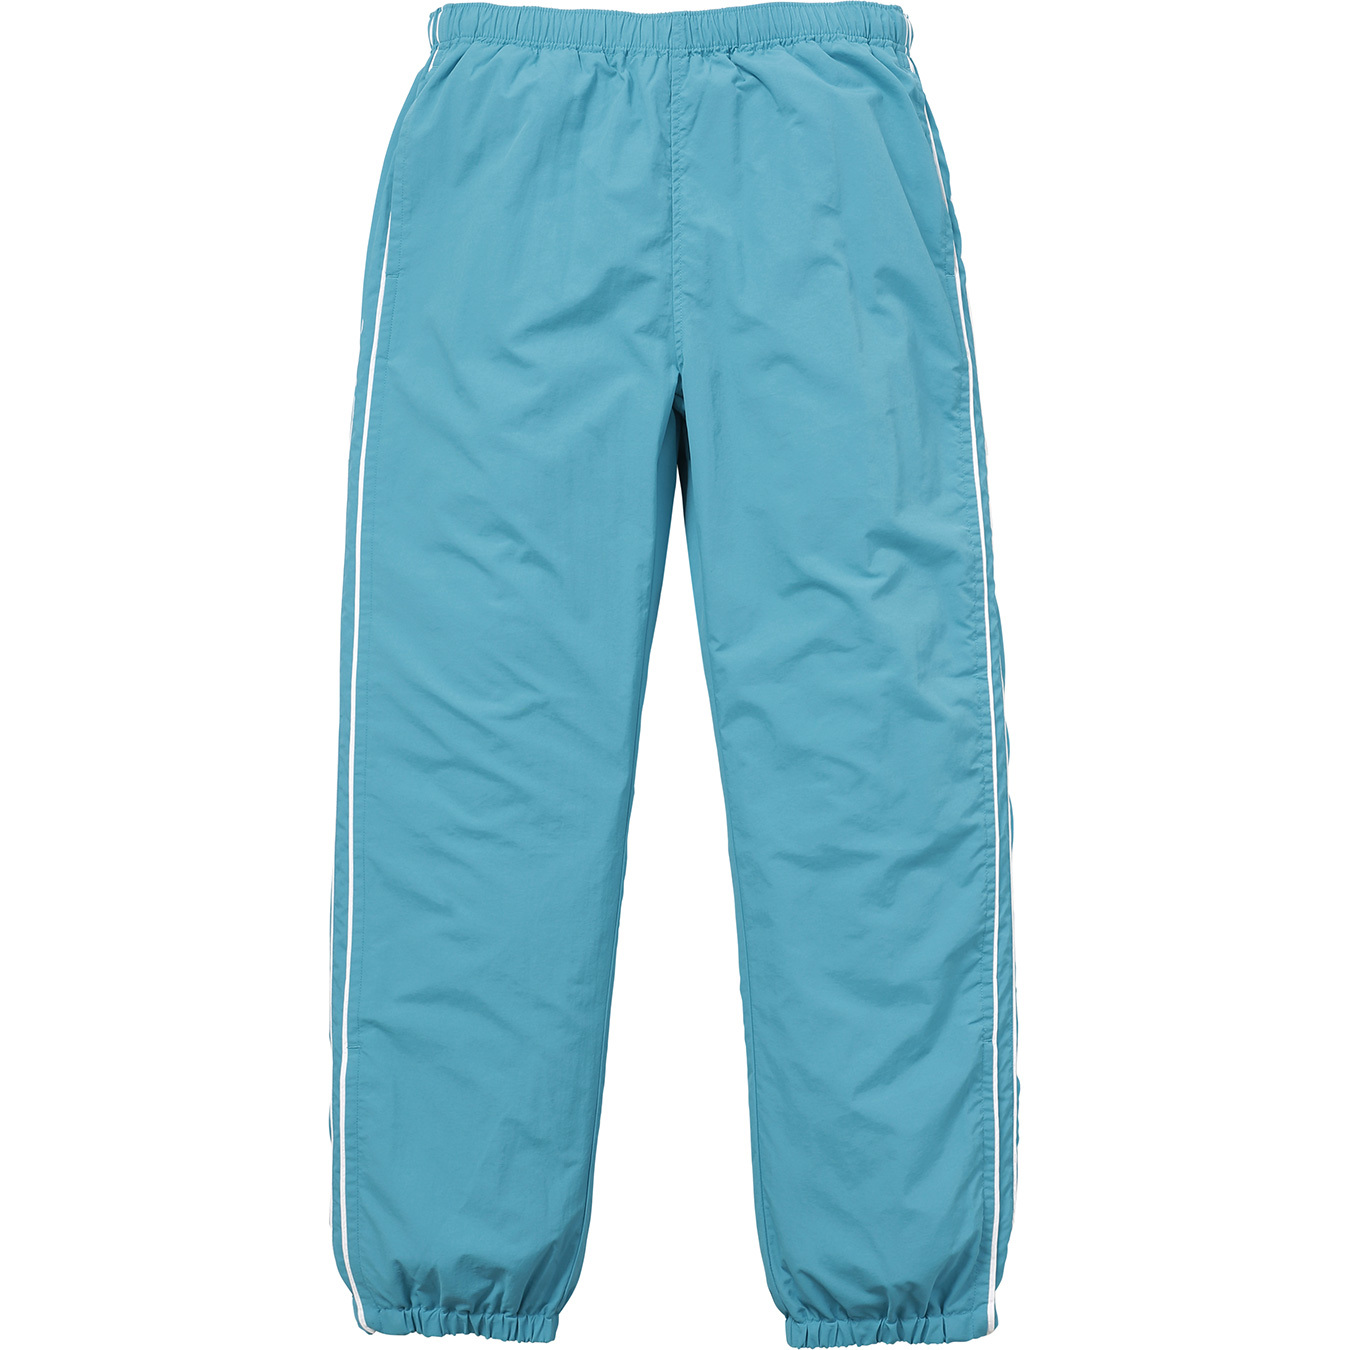 Supreme Piping Track Pant Teal Men's - FW17 - US